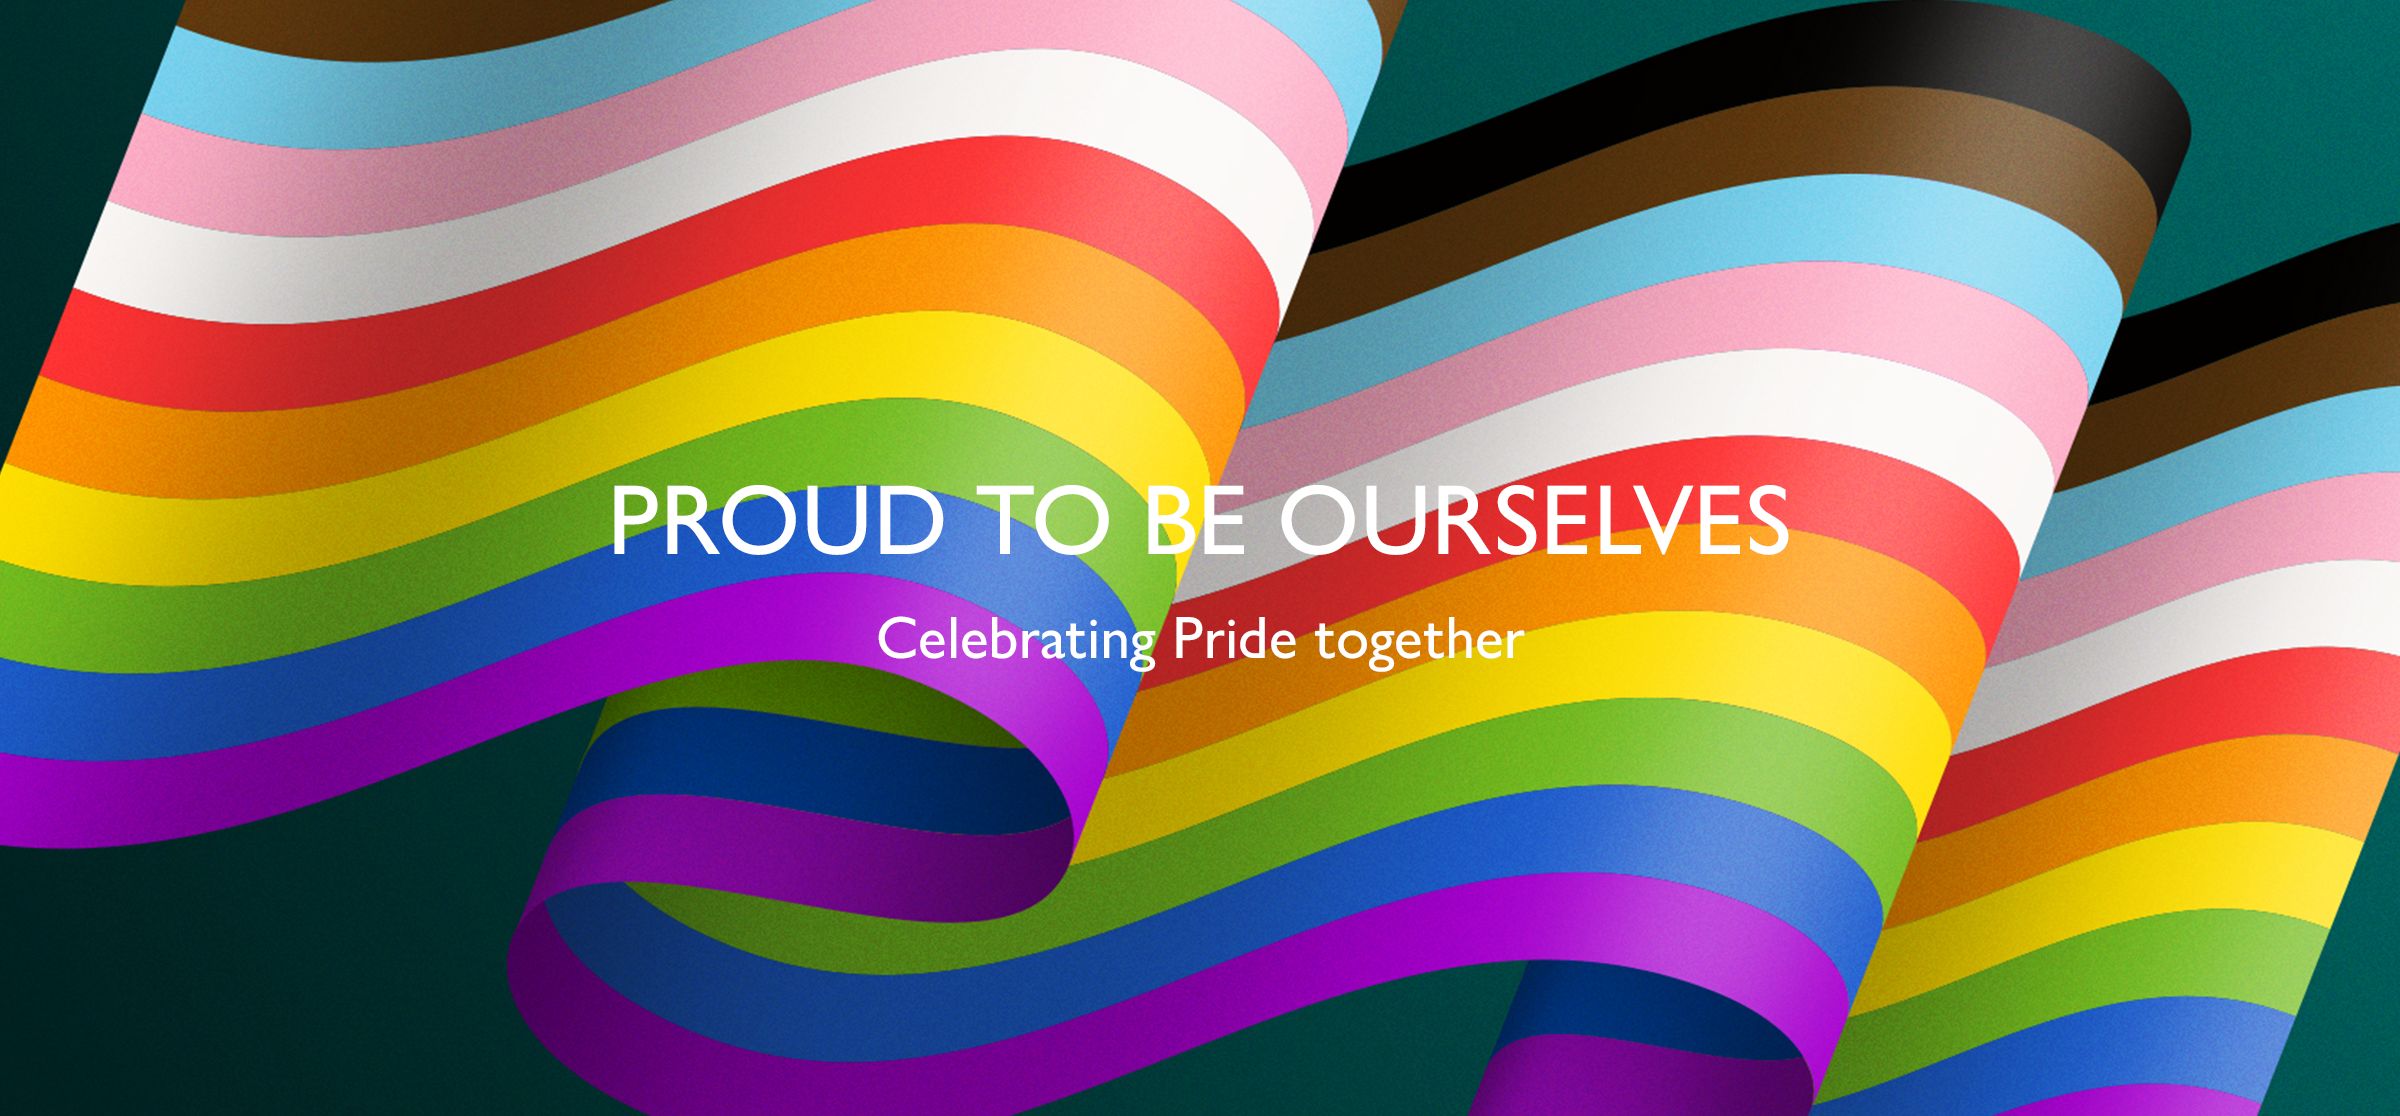 Image of the Progress Pride Flag with the title 'Proud to be ourselves' on it in white text